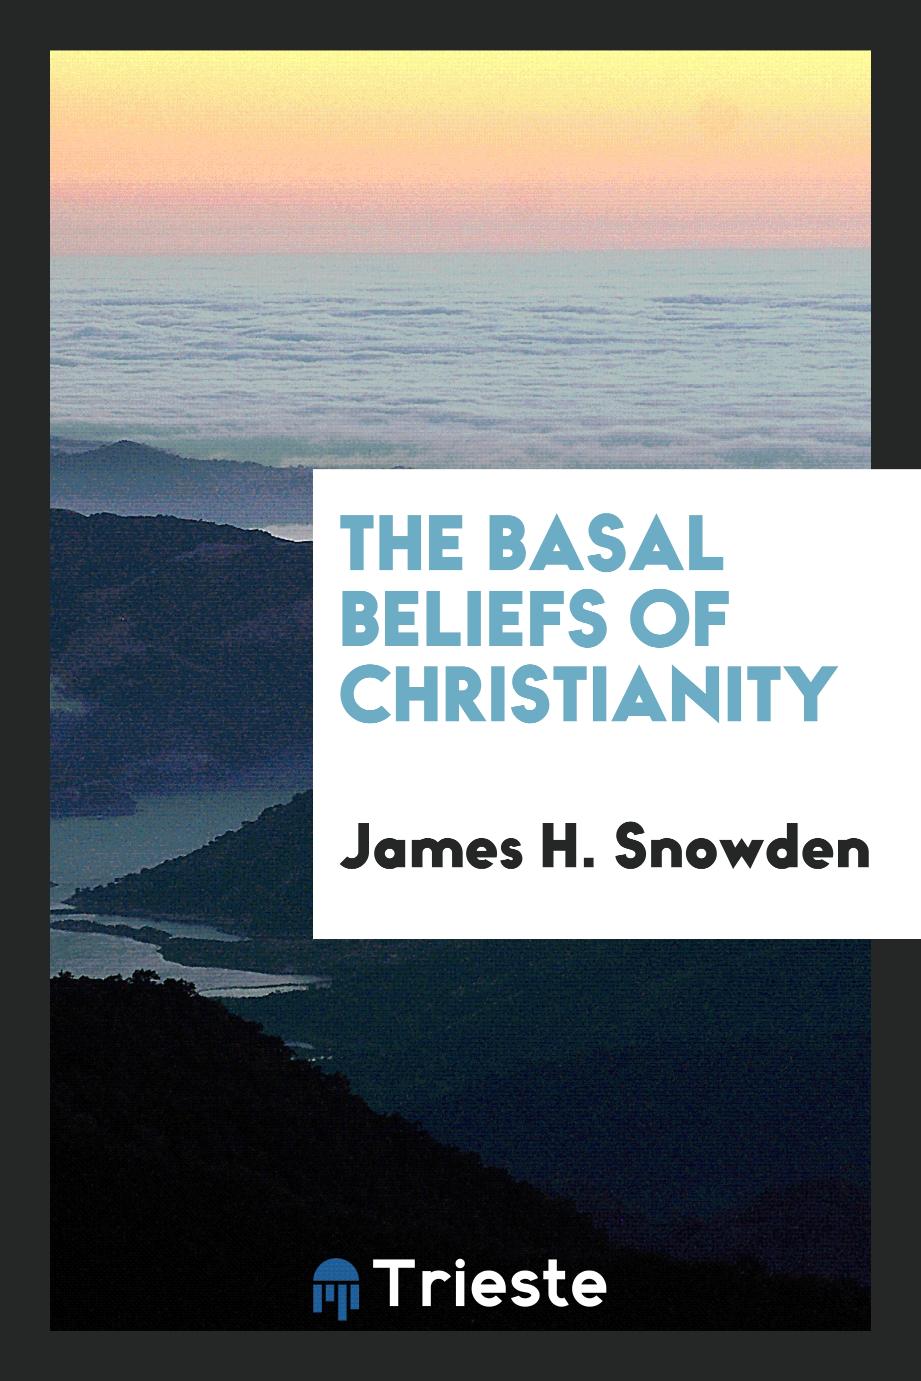 The basal beliefs of Christianity